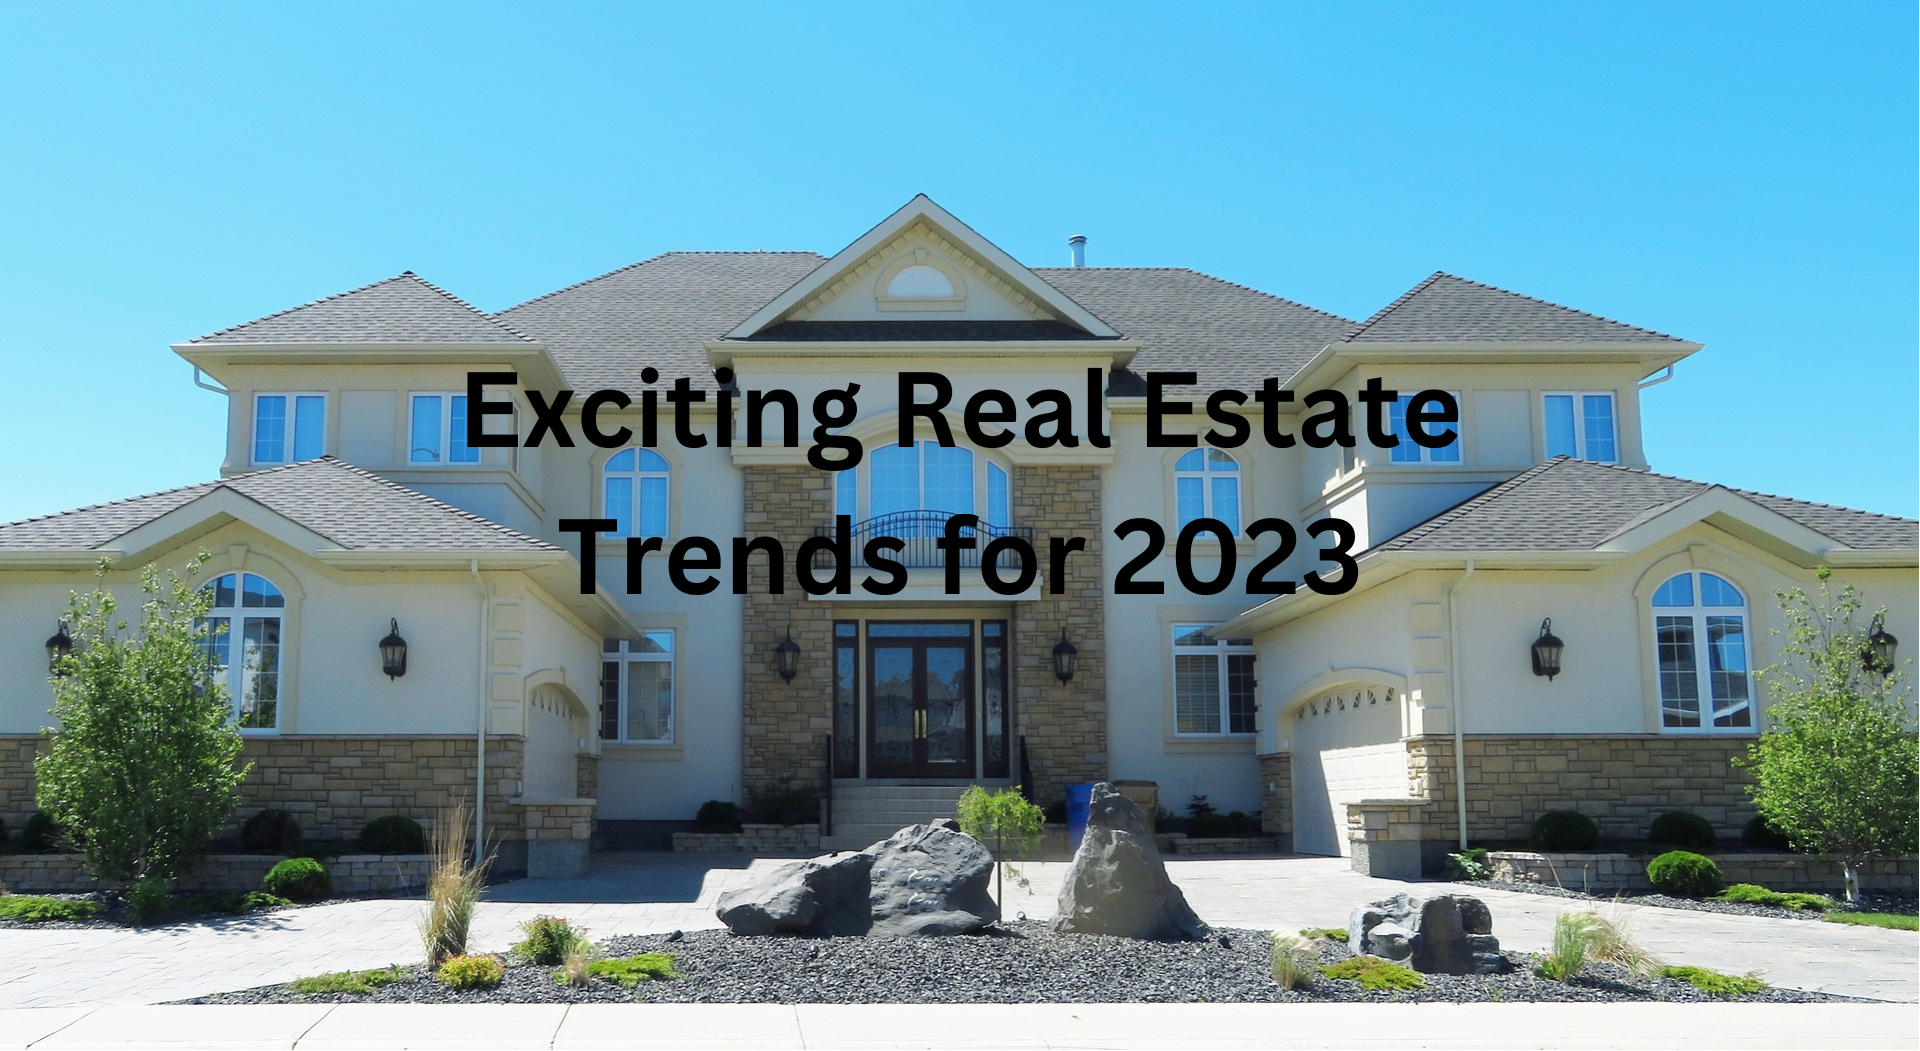 Exciting Real Estate Trends for 2023